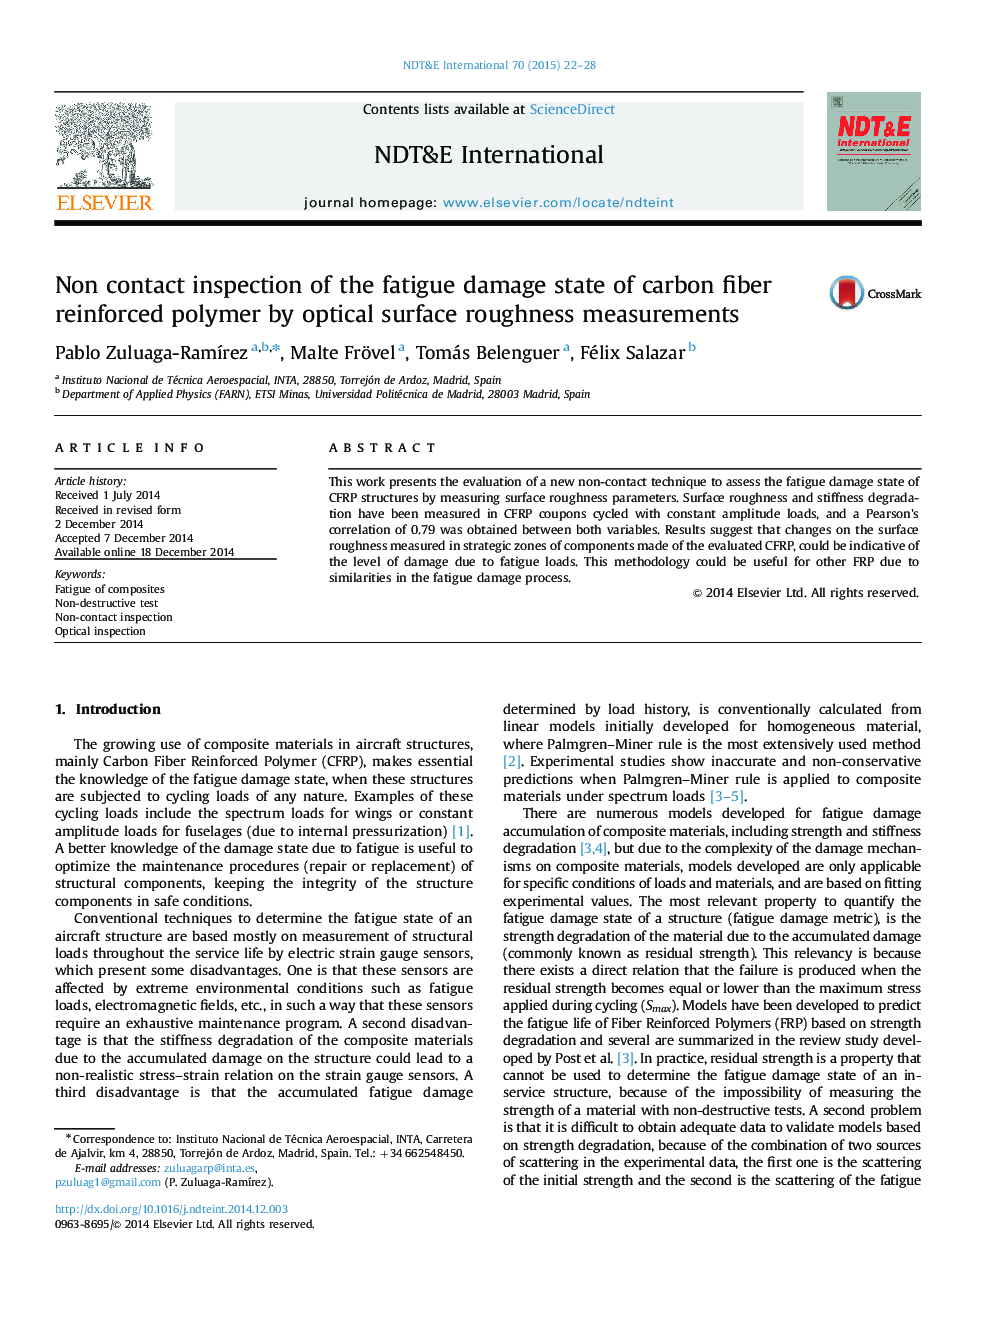 Non contact inspection of the fatigue damage state of carbon fiber reinforced polymer by optical surface roughness measurements